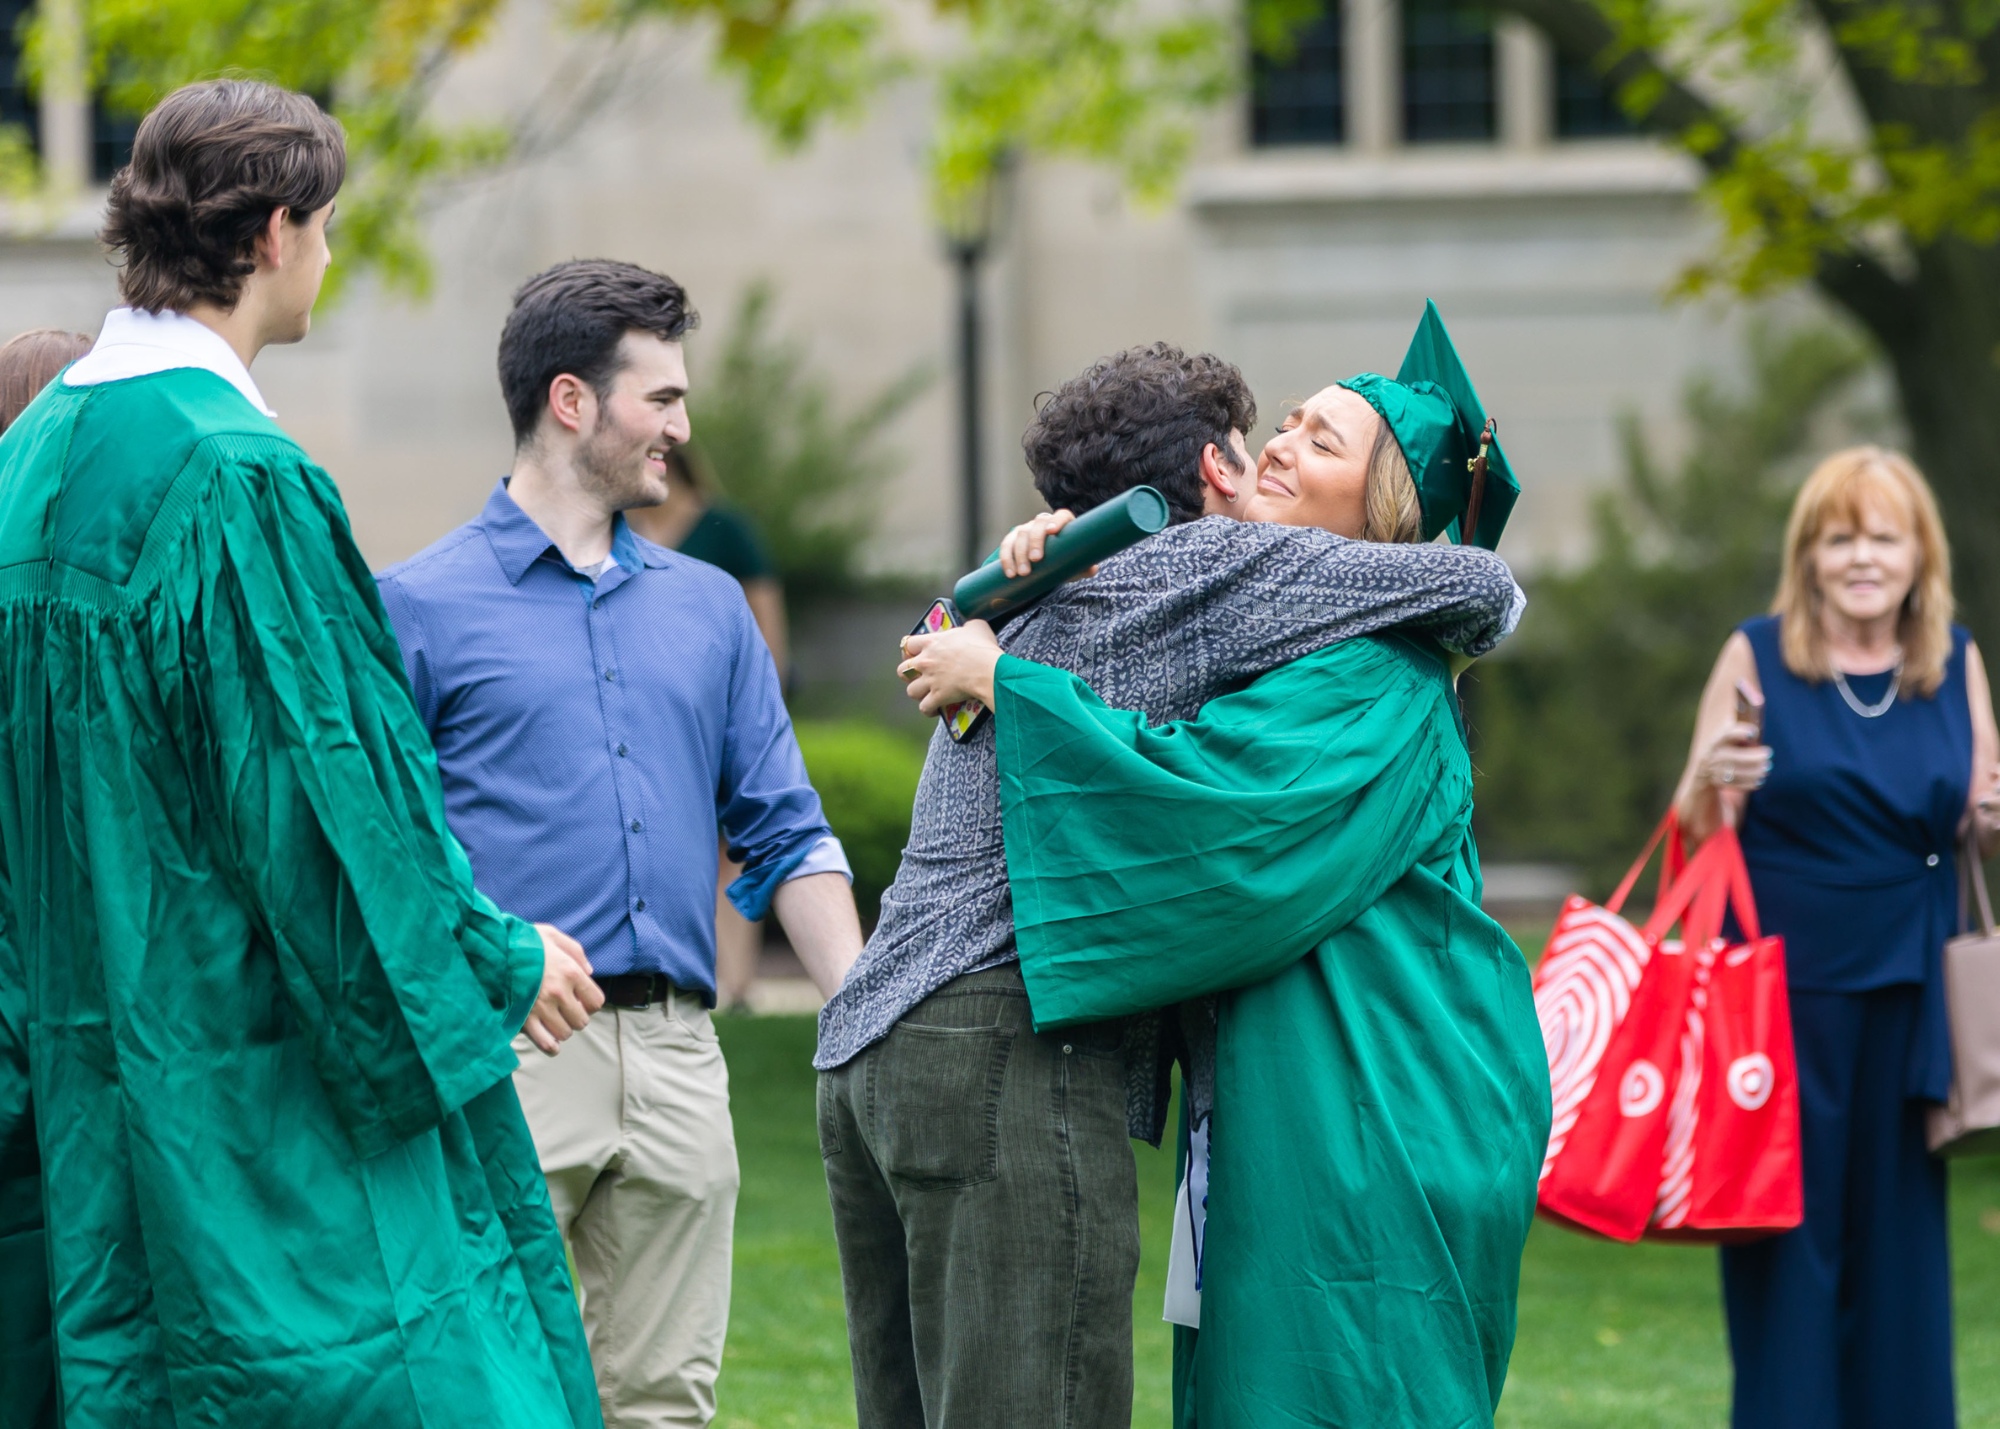 Illinois Wesleyan graduates hugging friends on the quad after commencement